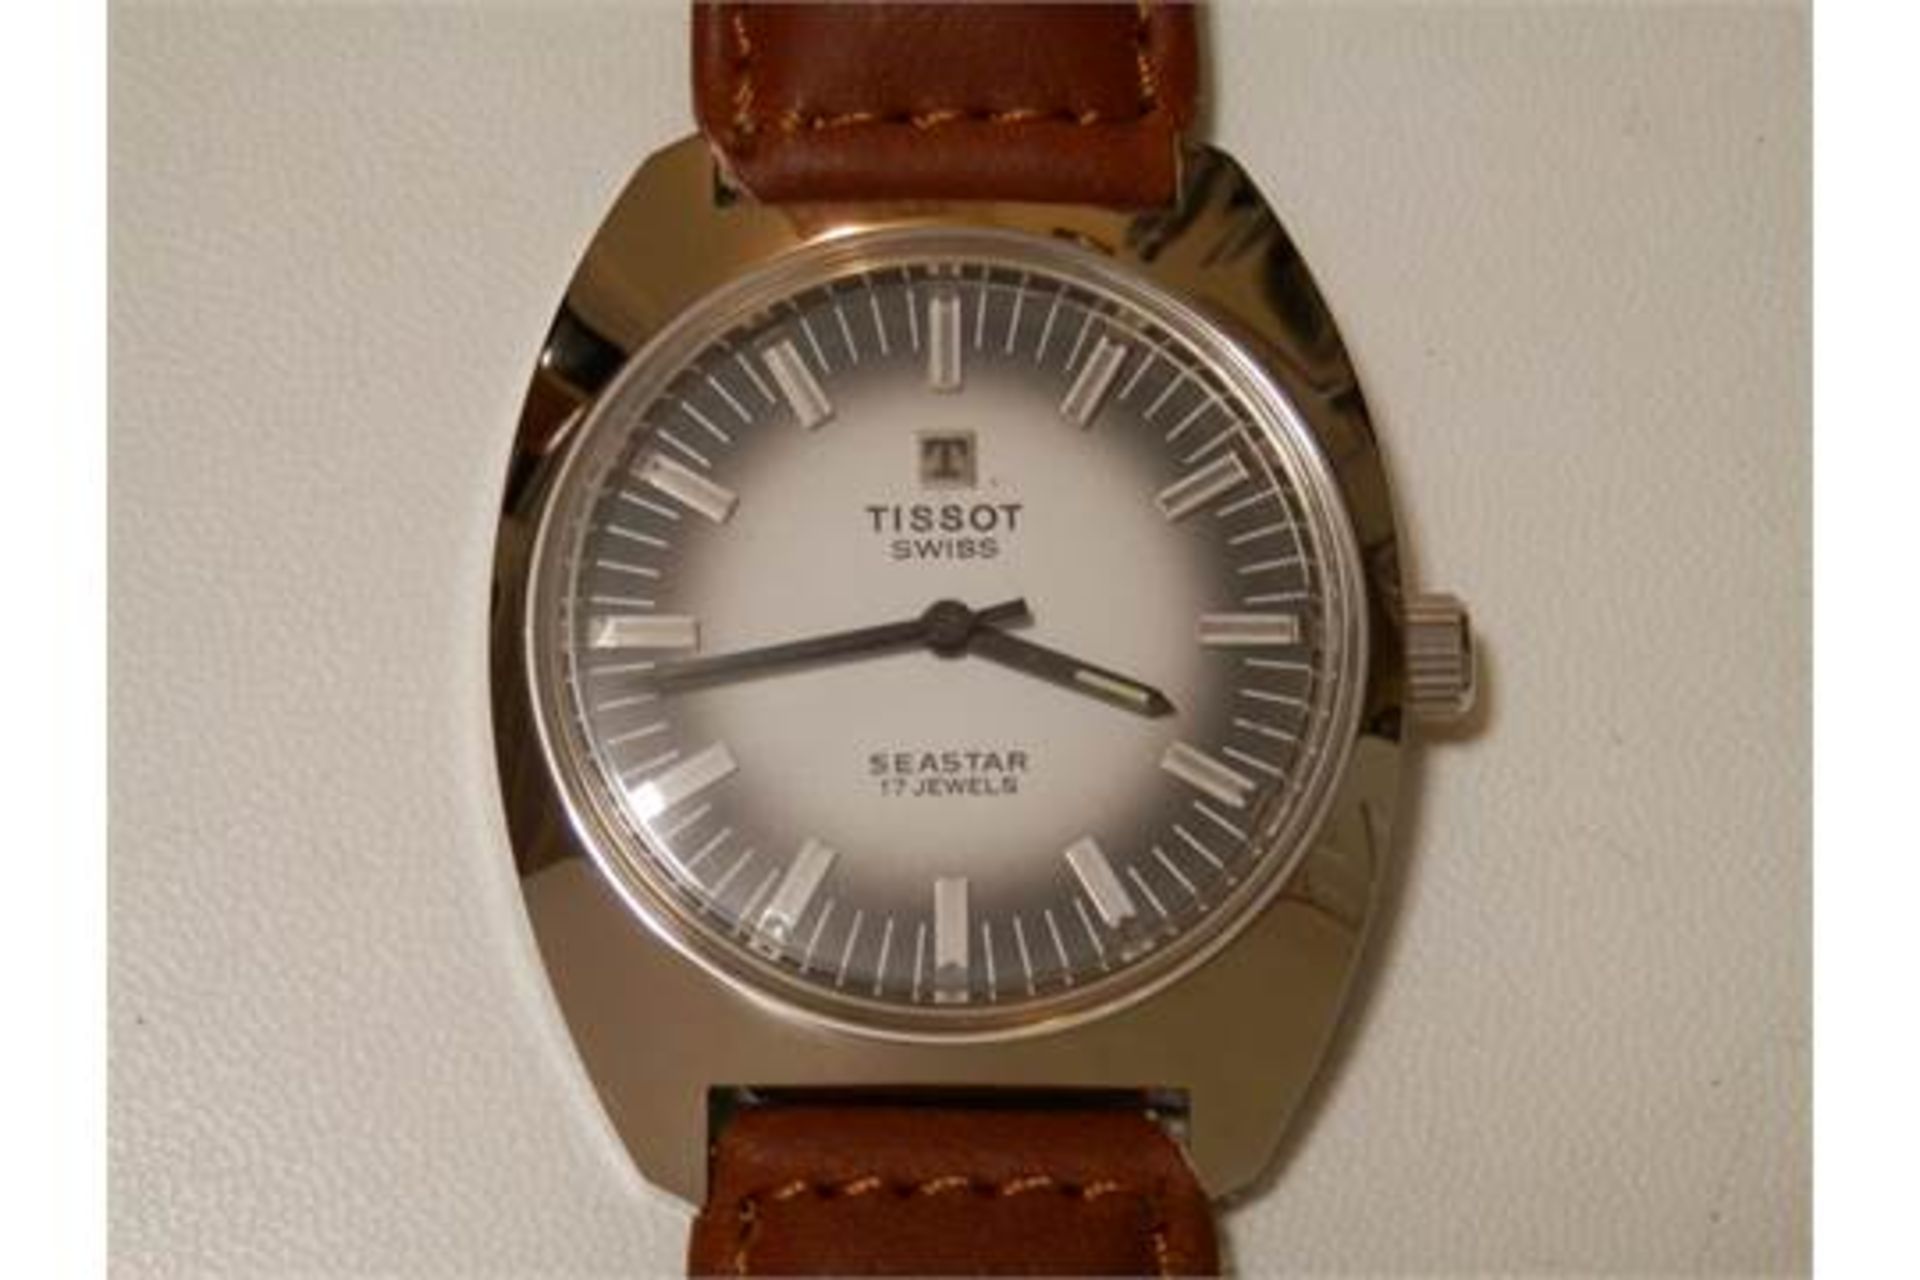 SUPERB GENTS TISSOT SEASTAR, POSSIBLY NEW/OLD STOCK 1970S 17 JEWEL SWISS WATCH (#2 of 3 available) - Image 3 of 10